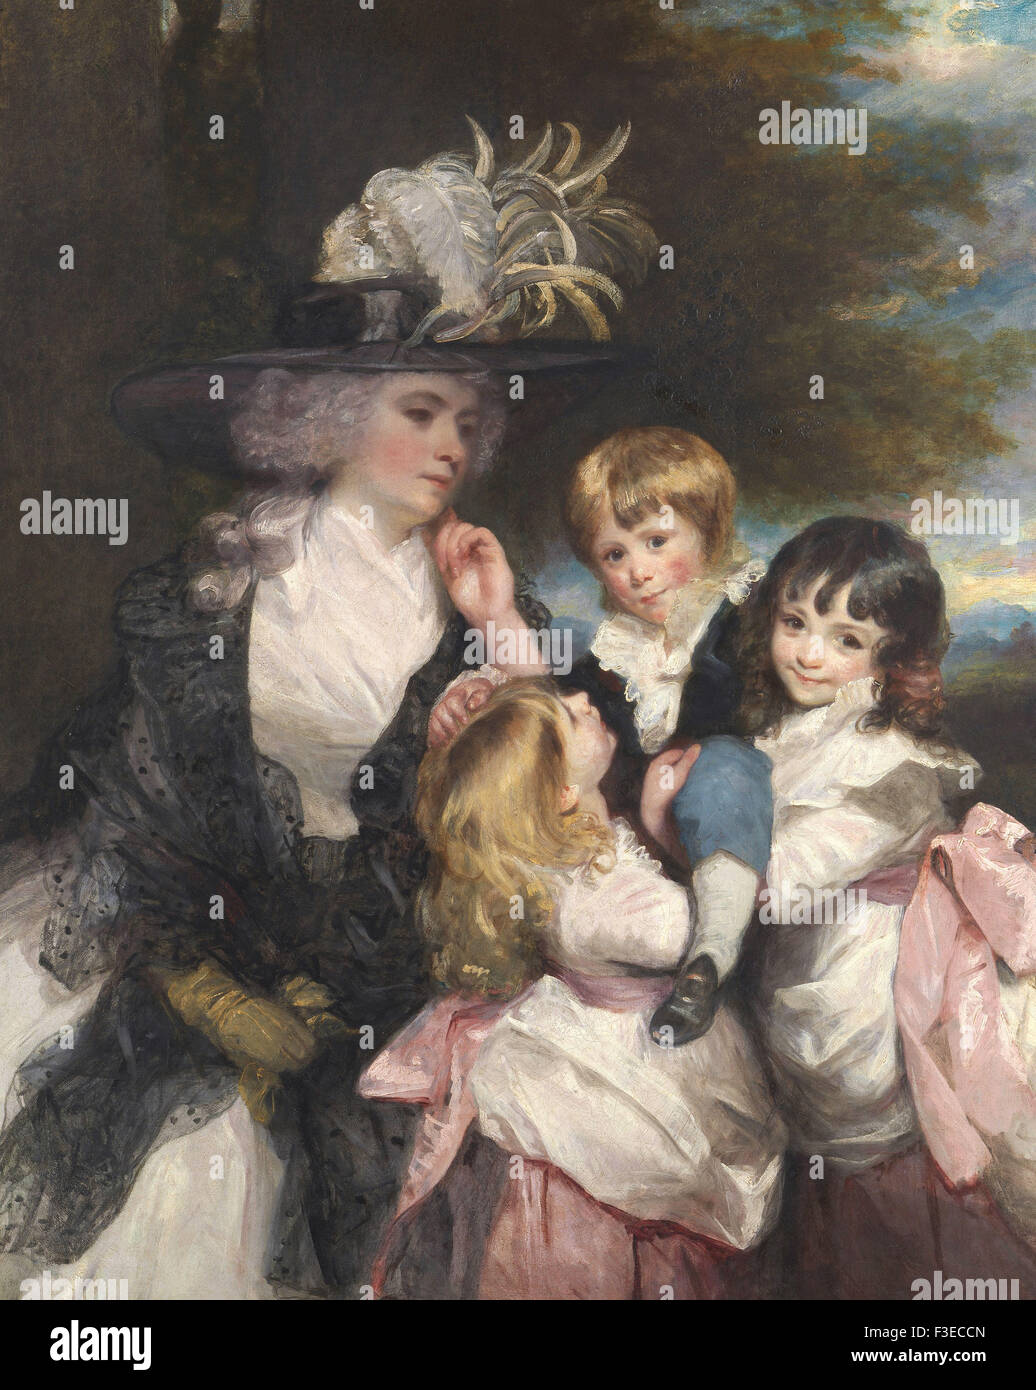 Sir Joshua Reynolds - Lady Smith (Charlotte Delaval) and Her Children (George Henry, Louisa, and Charlotte) Stock Photo